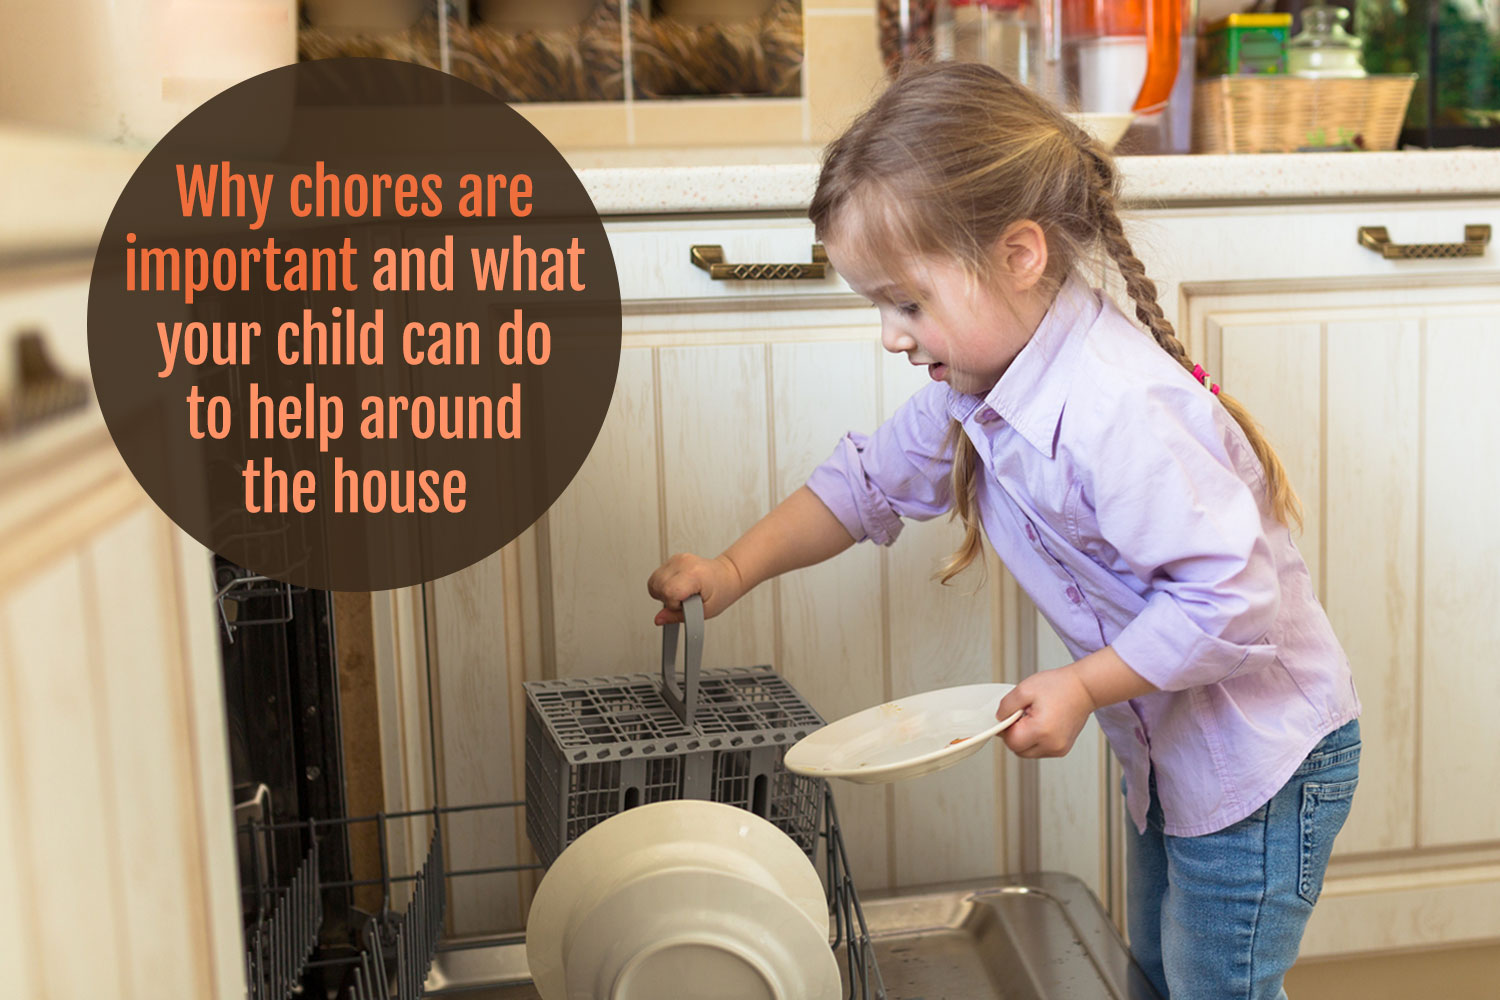 Fall Chores: After-School Chores to Instill Good Habits Year-Round